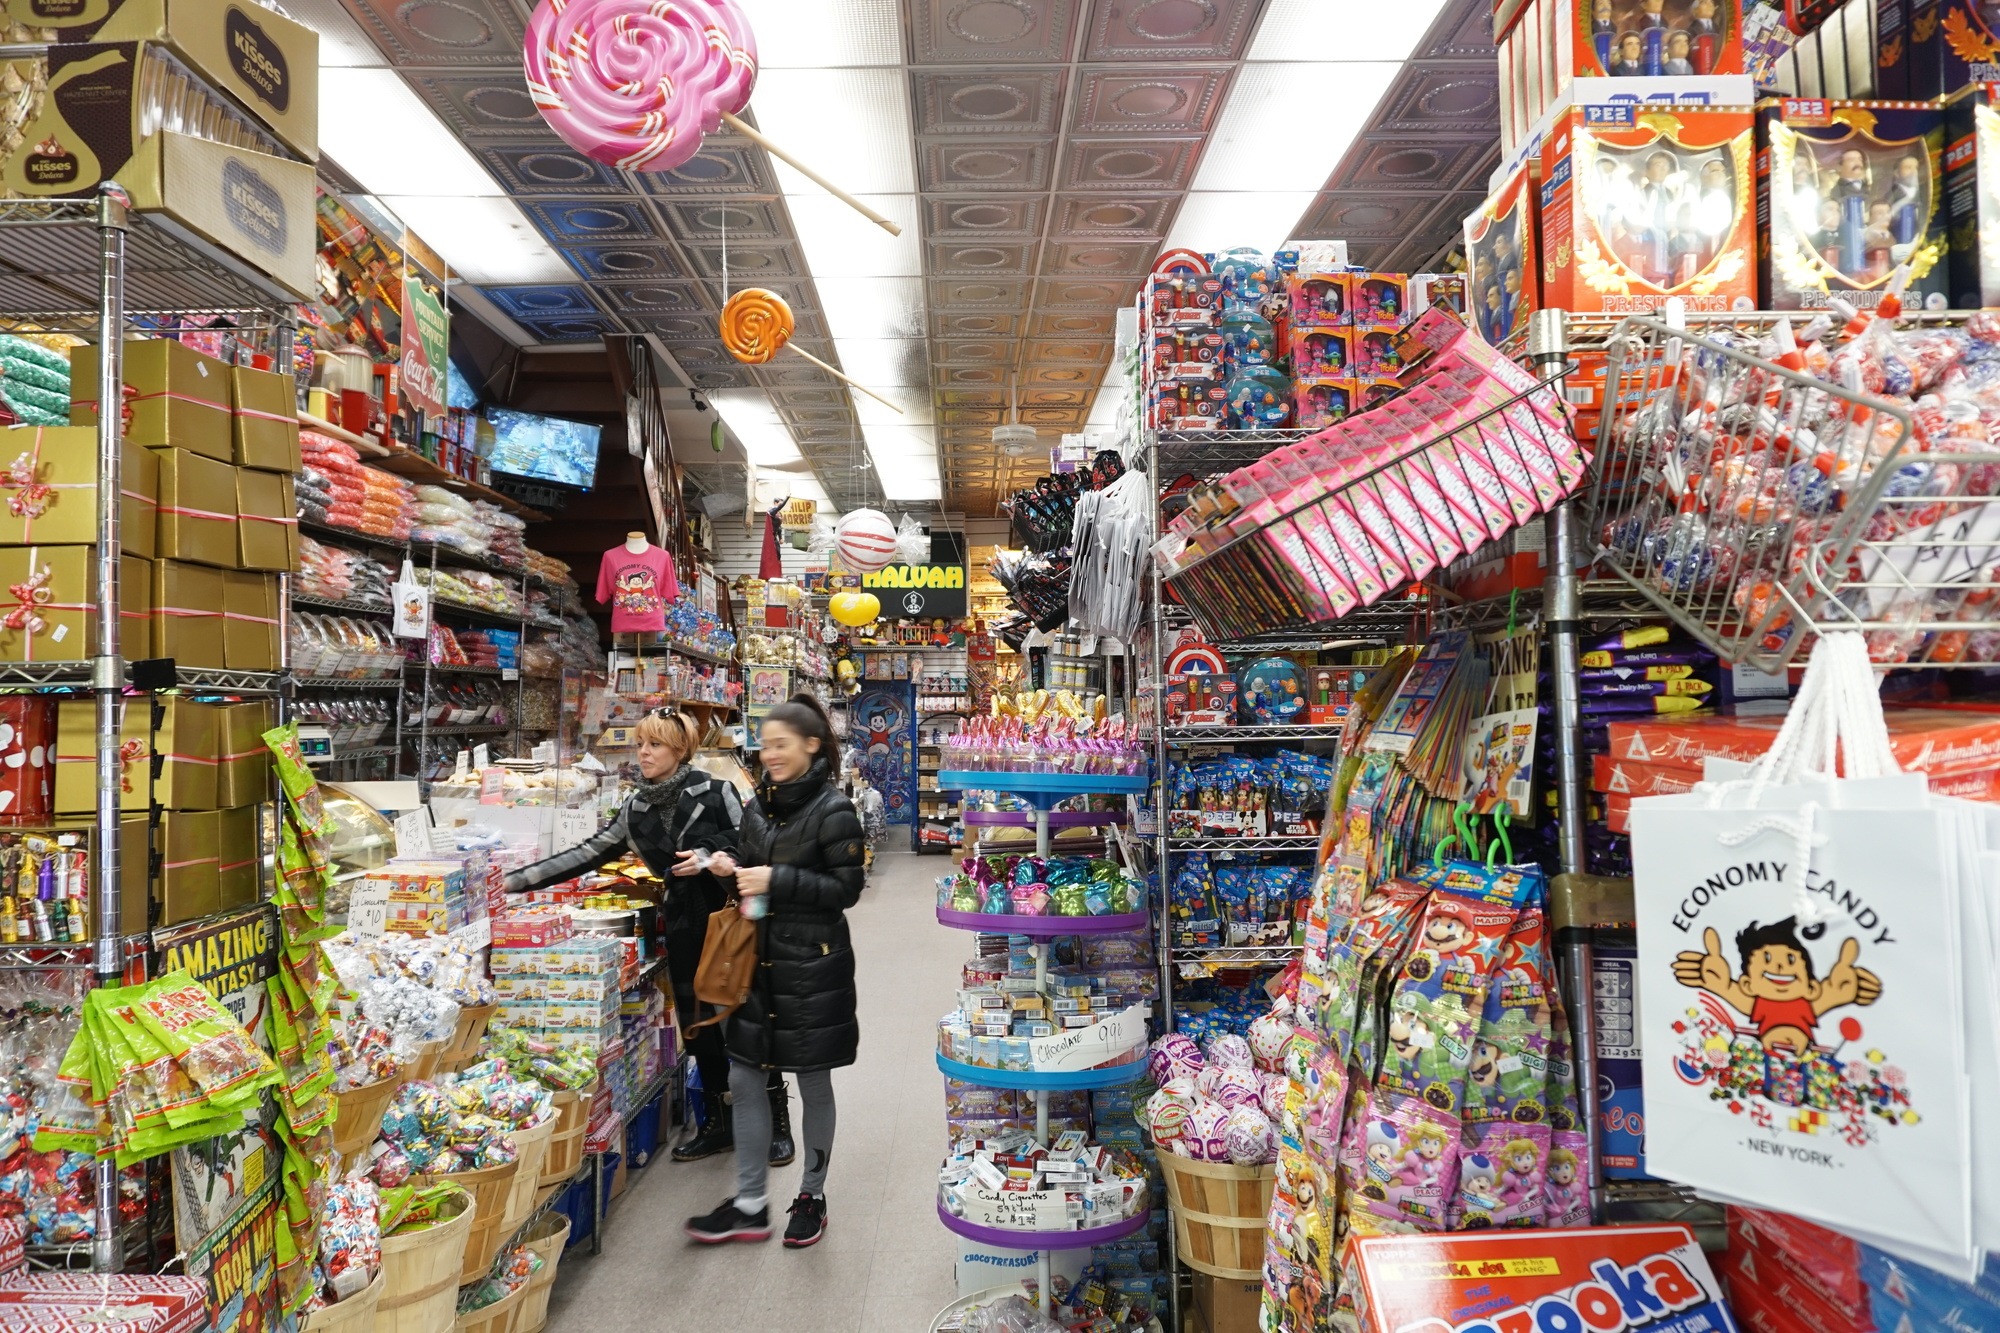 Economy Candy: Photo Tour of a Real Old School New York City Shop